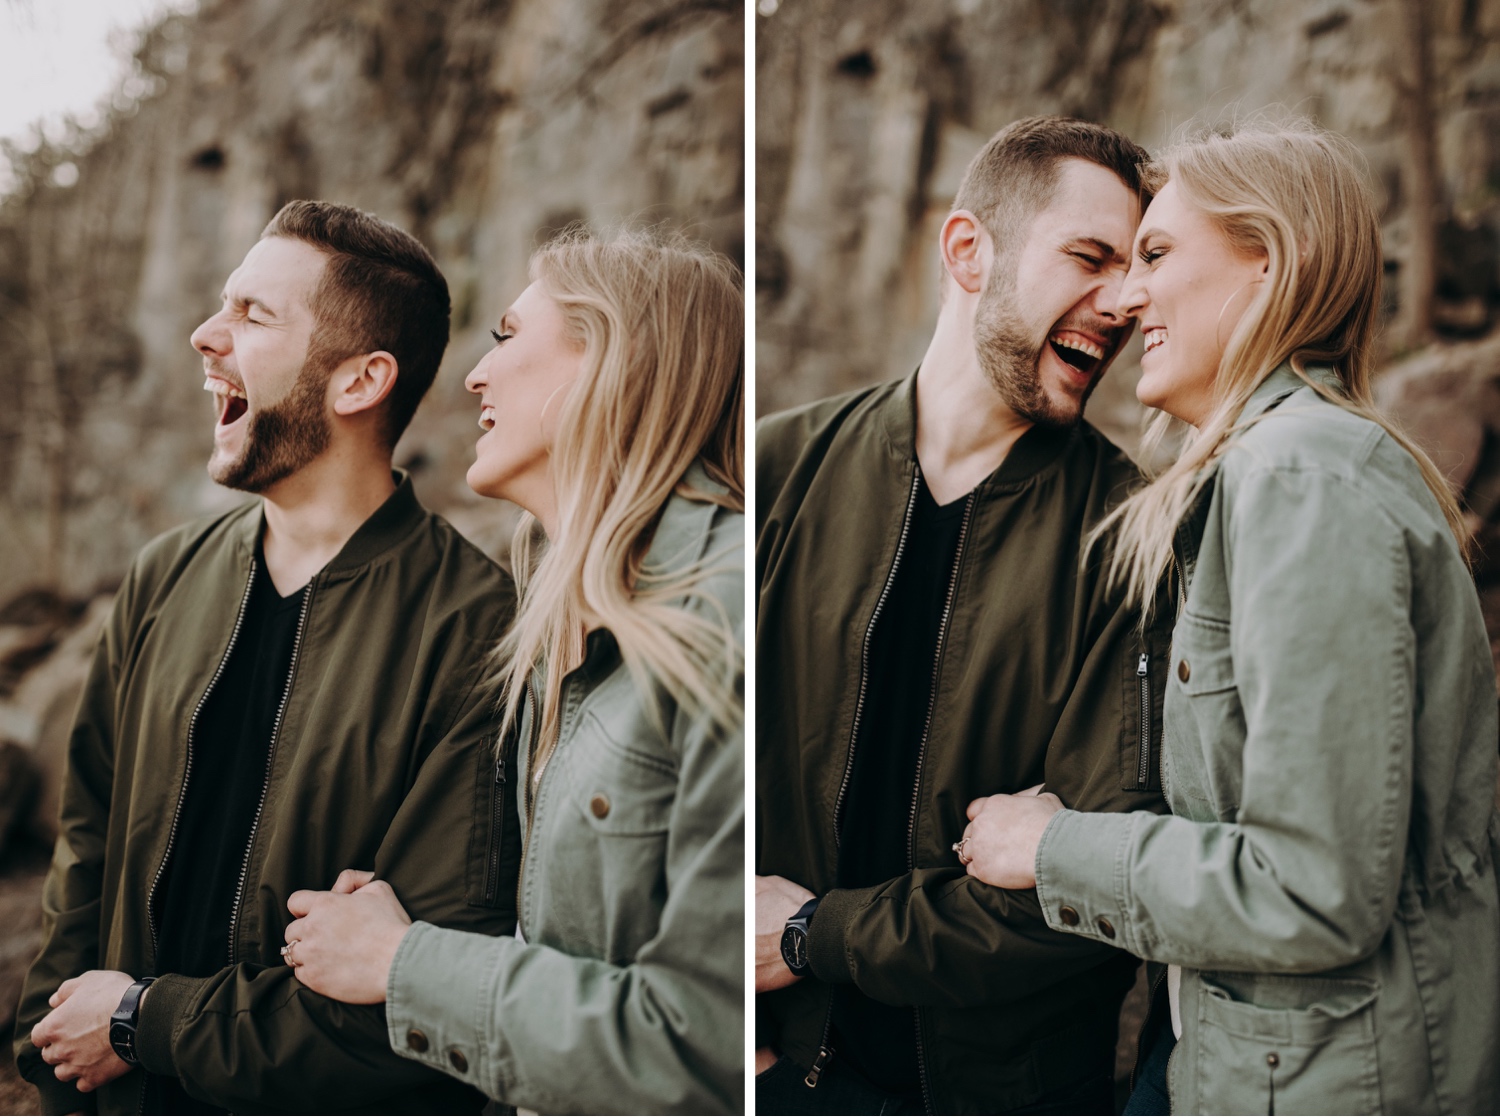 Laughing photos at a Taylors falls minnesota engagement session.